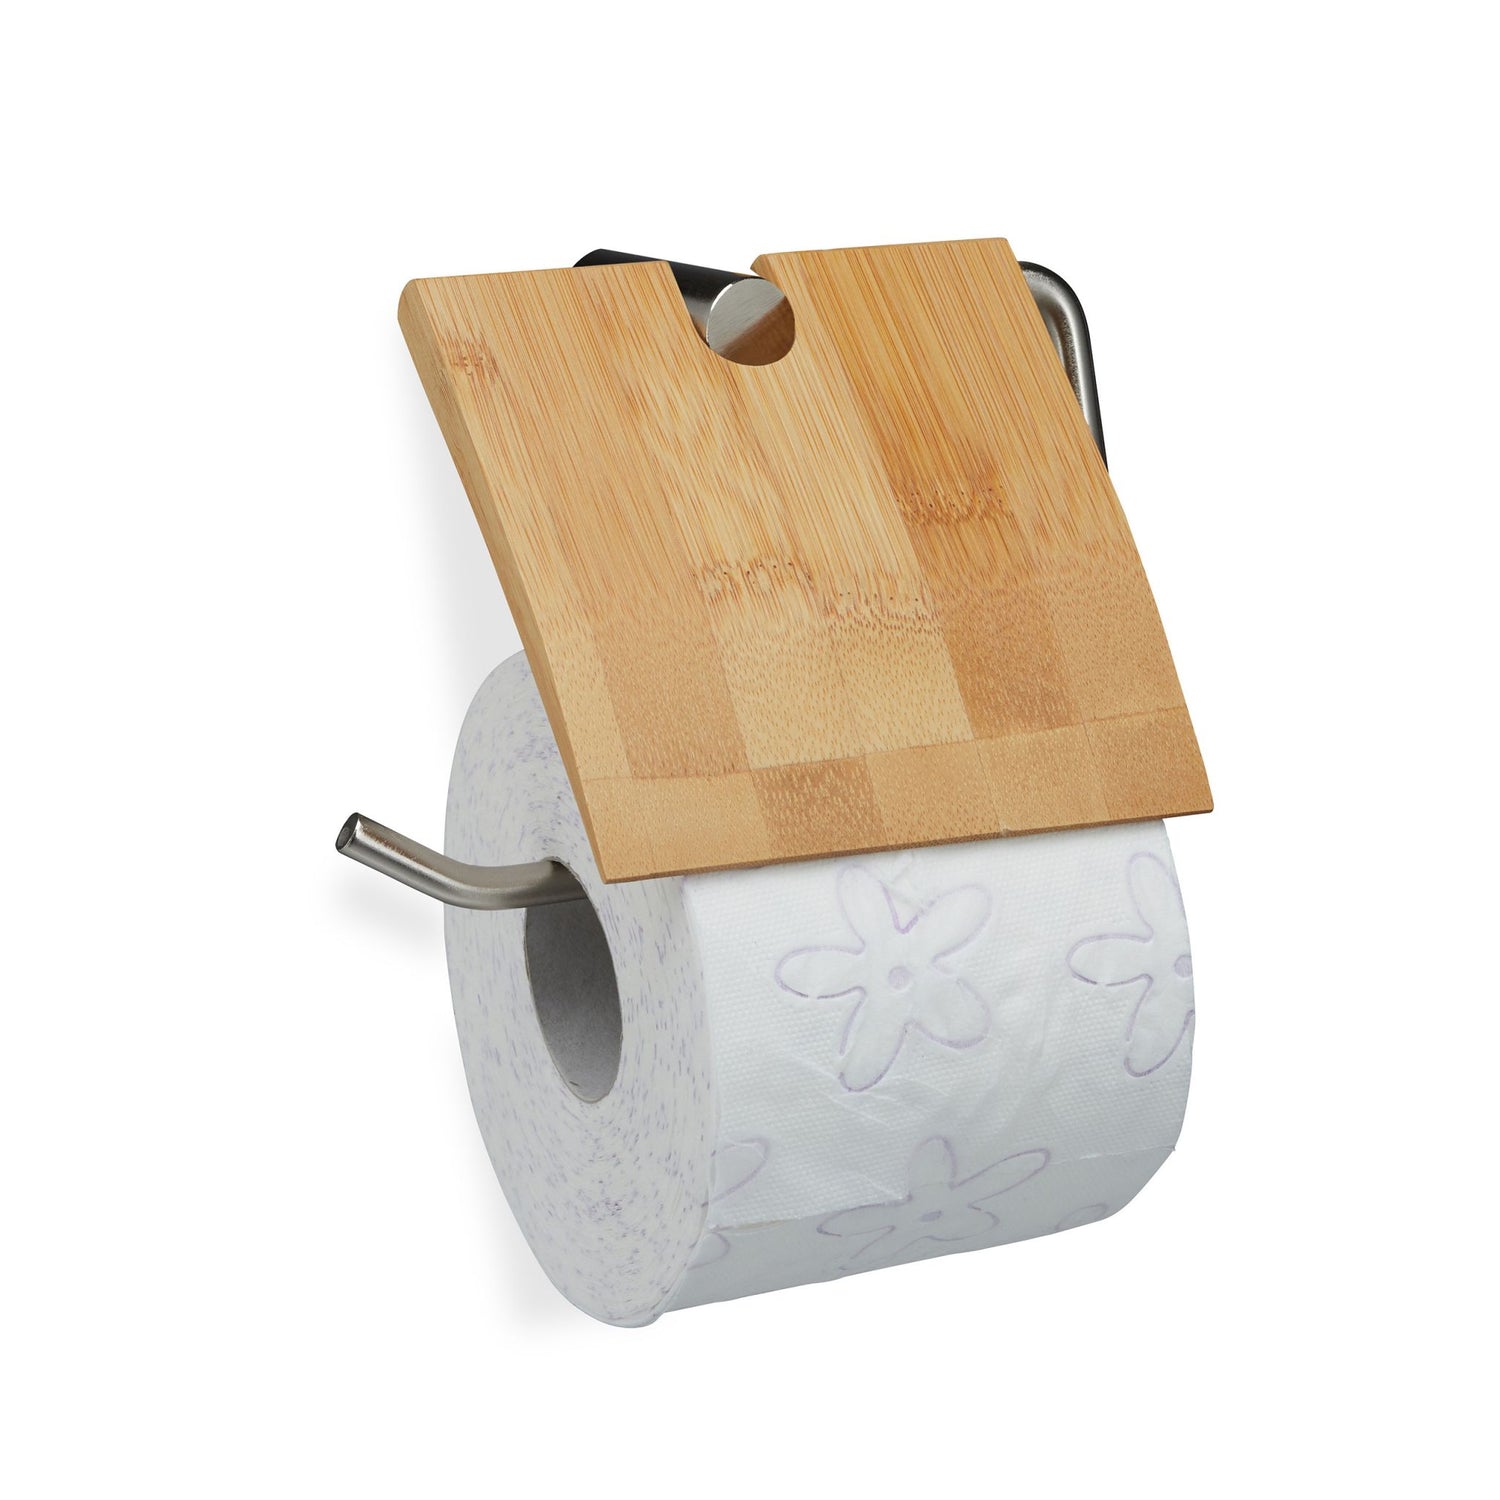 RelaxDays  Bamboo Toilet Paper Holder Bamboo Bathrooms